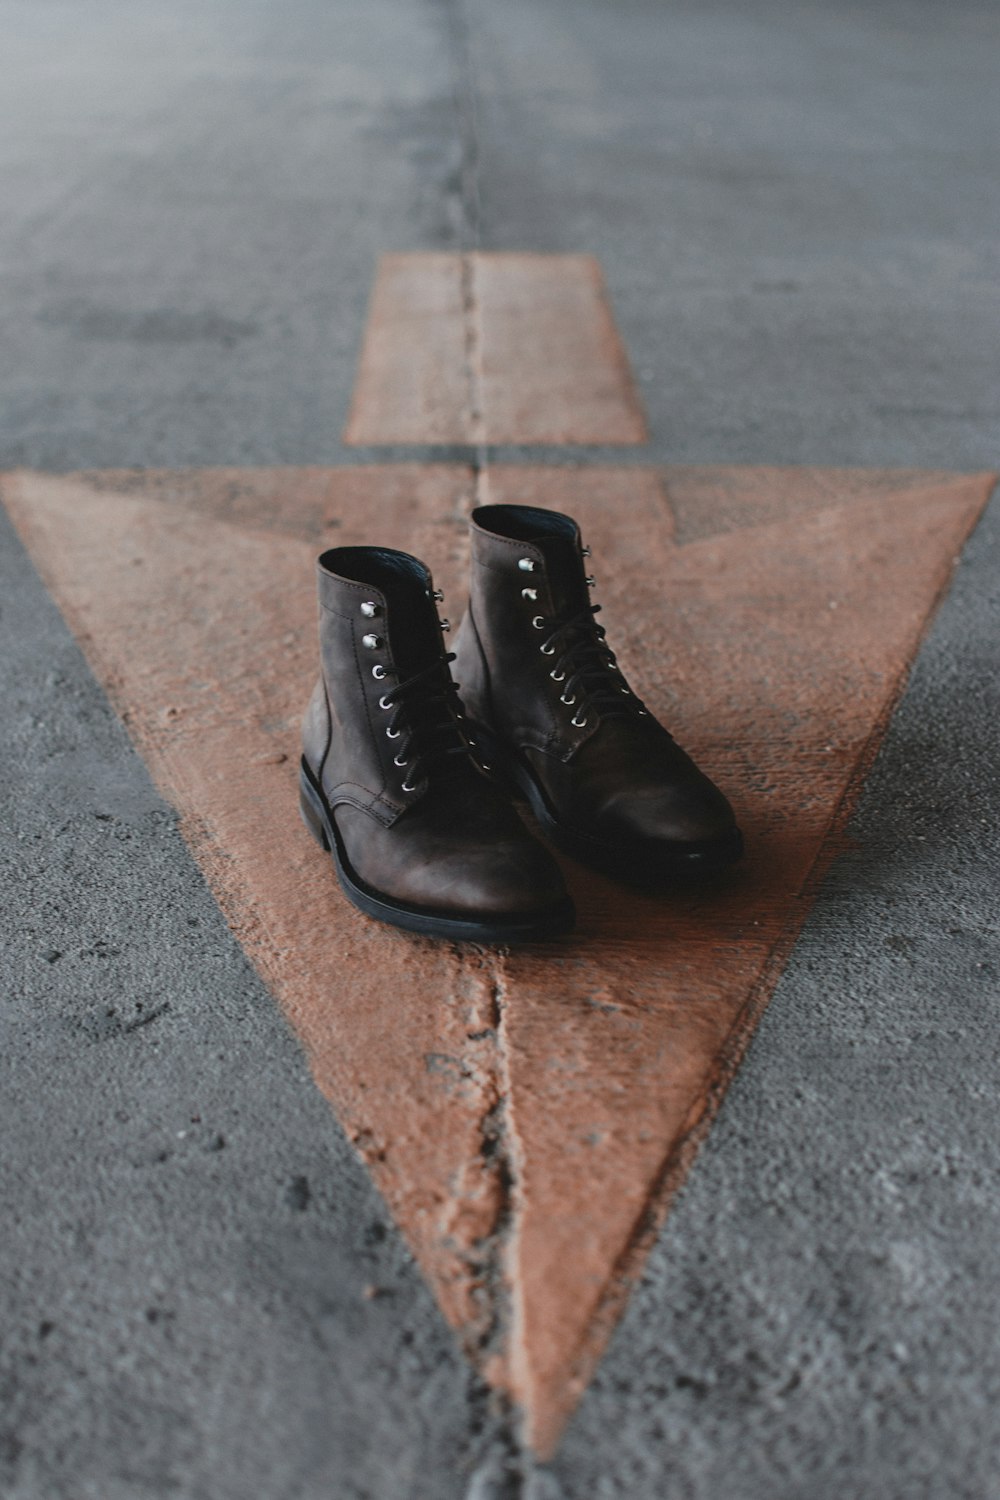 pair of brown leather boots on pavement